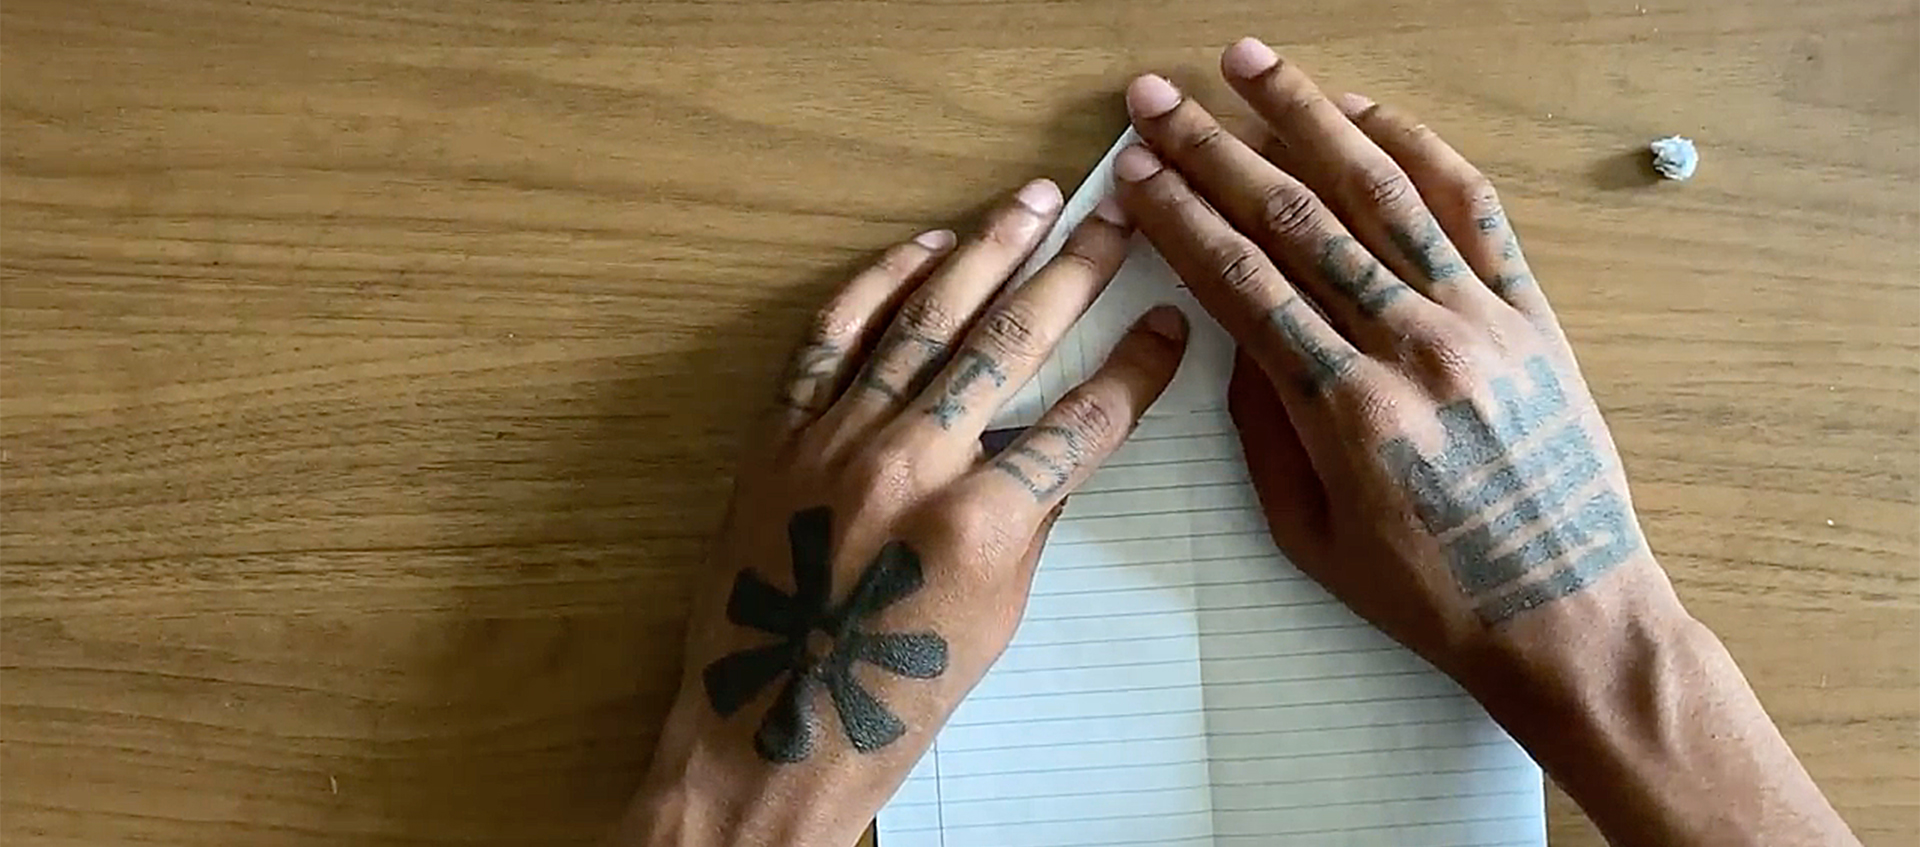 The tattooed hands of African American artist Hakim Callwood begin to fold a piece of lined paper on a wooden surface into a paper airplane